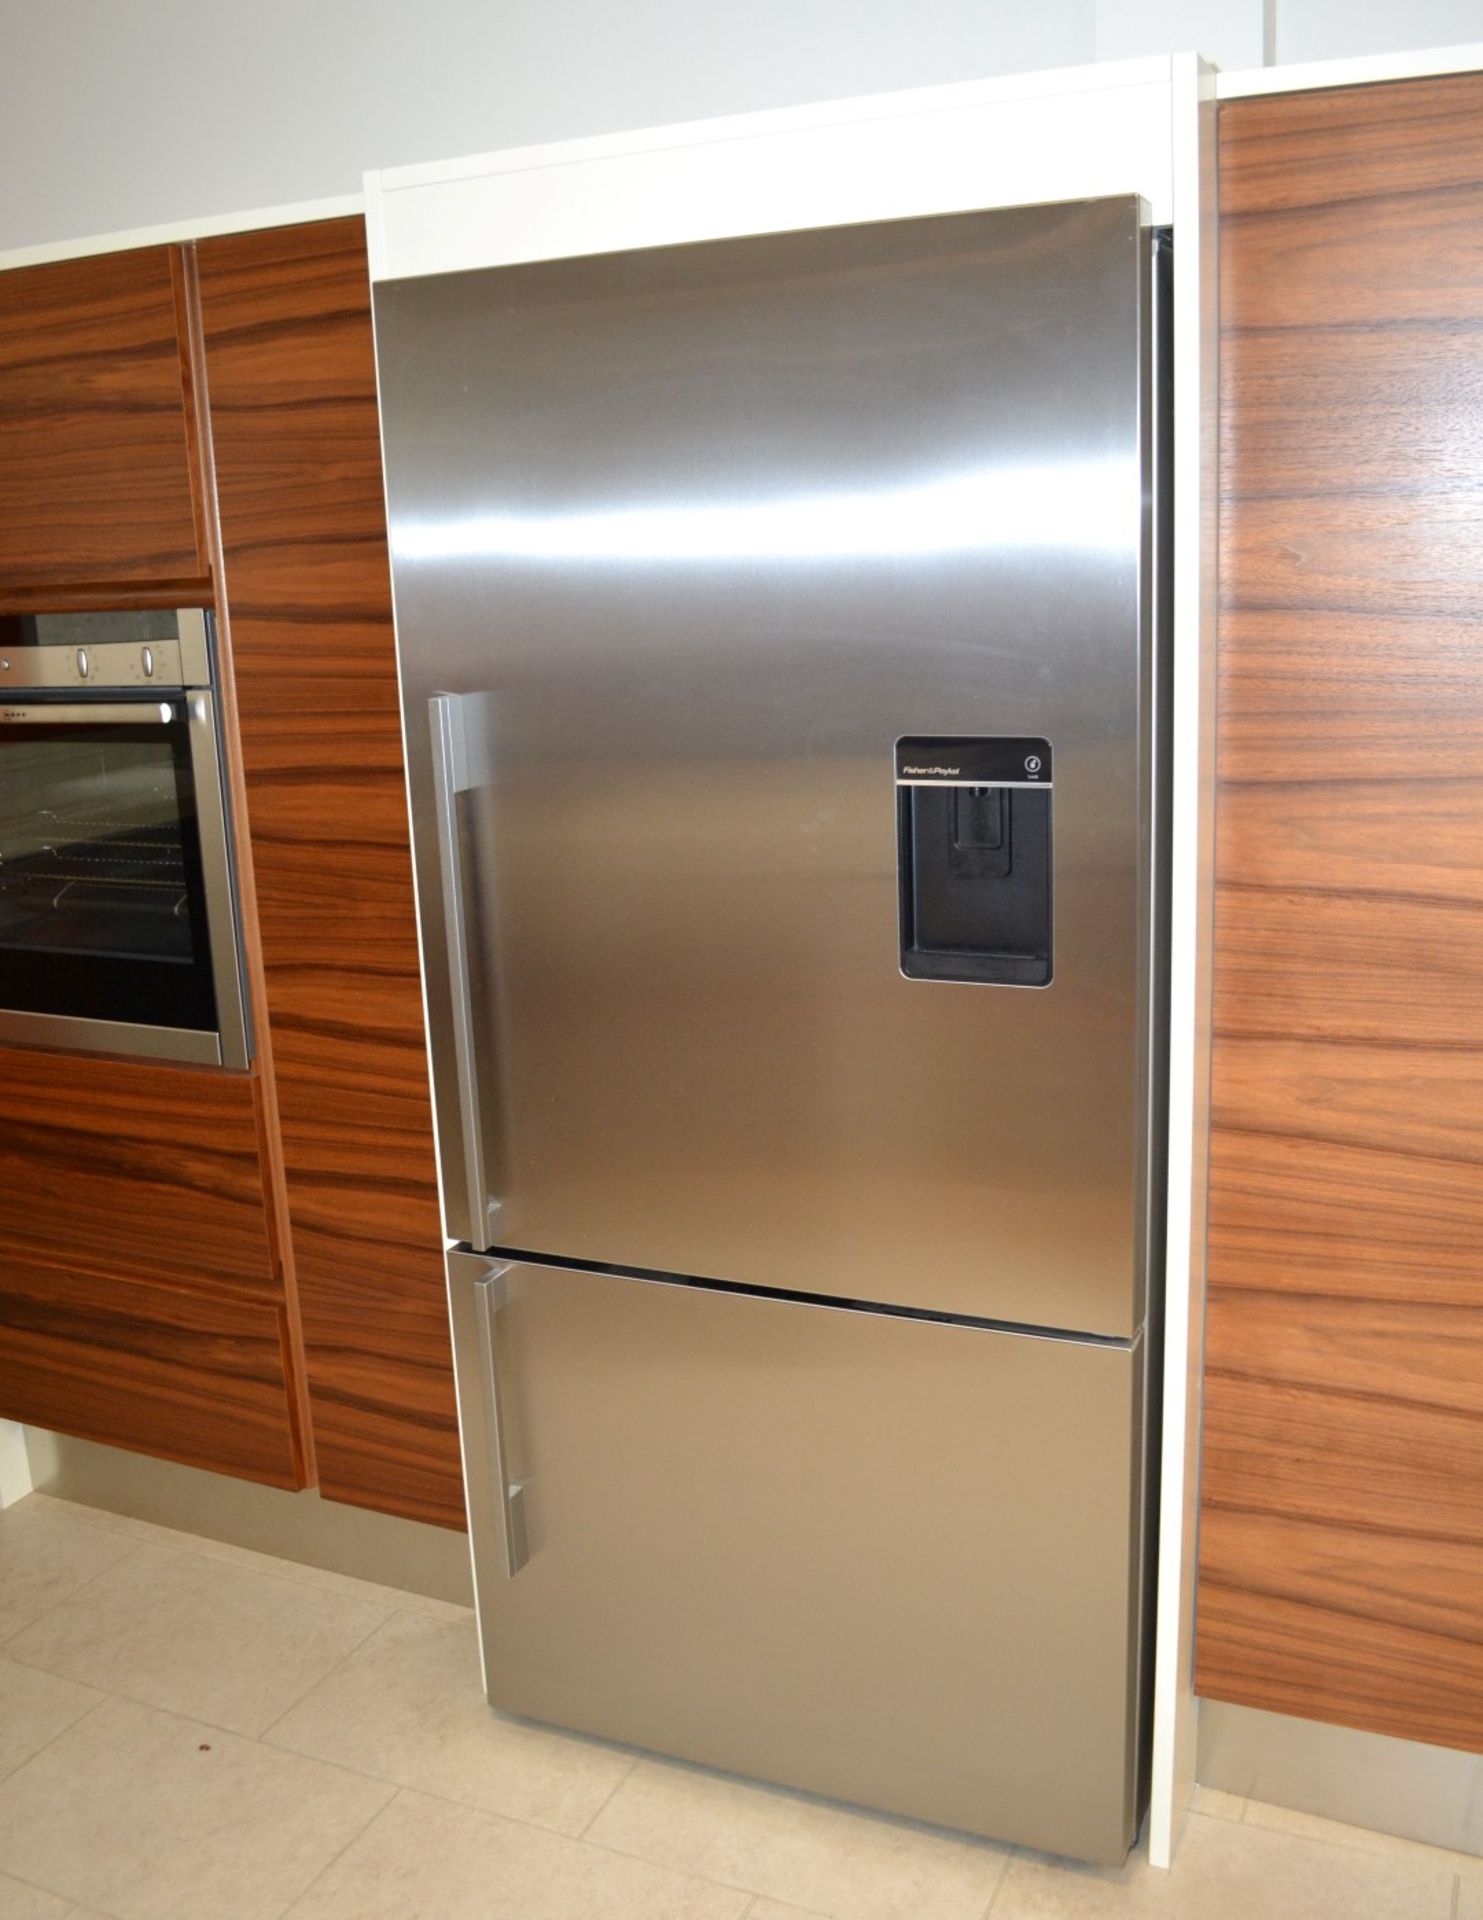 1 x Fisher & Paykel Stainless Steel 790mm 469 Litre Fridge Freezer from Showroom Display Kitchen -